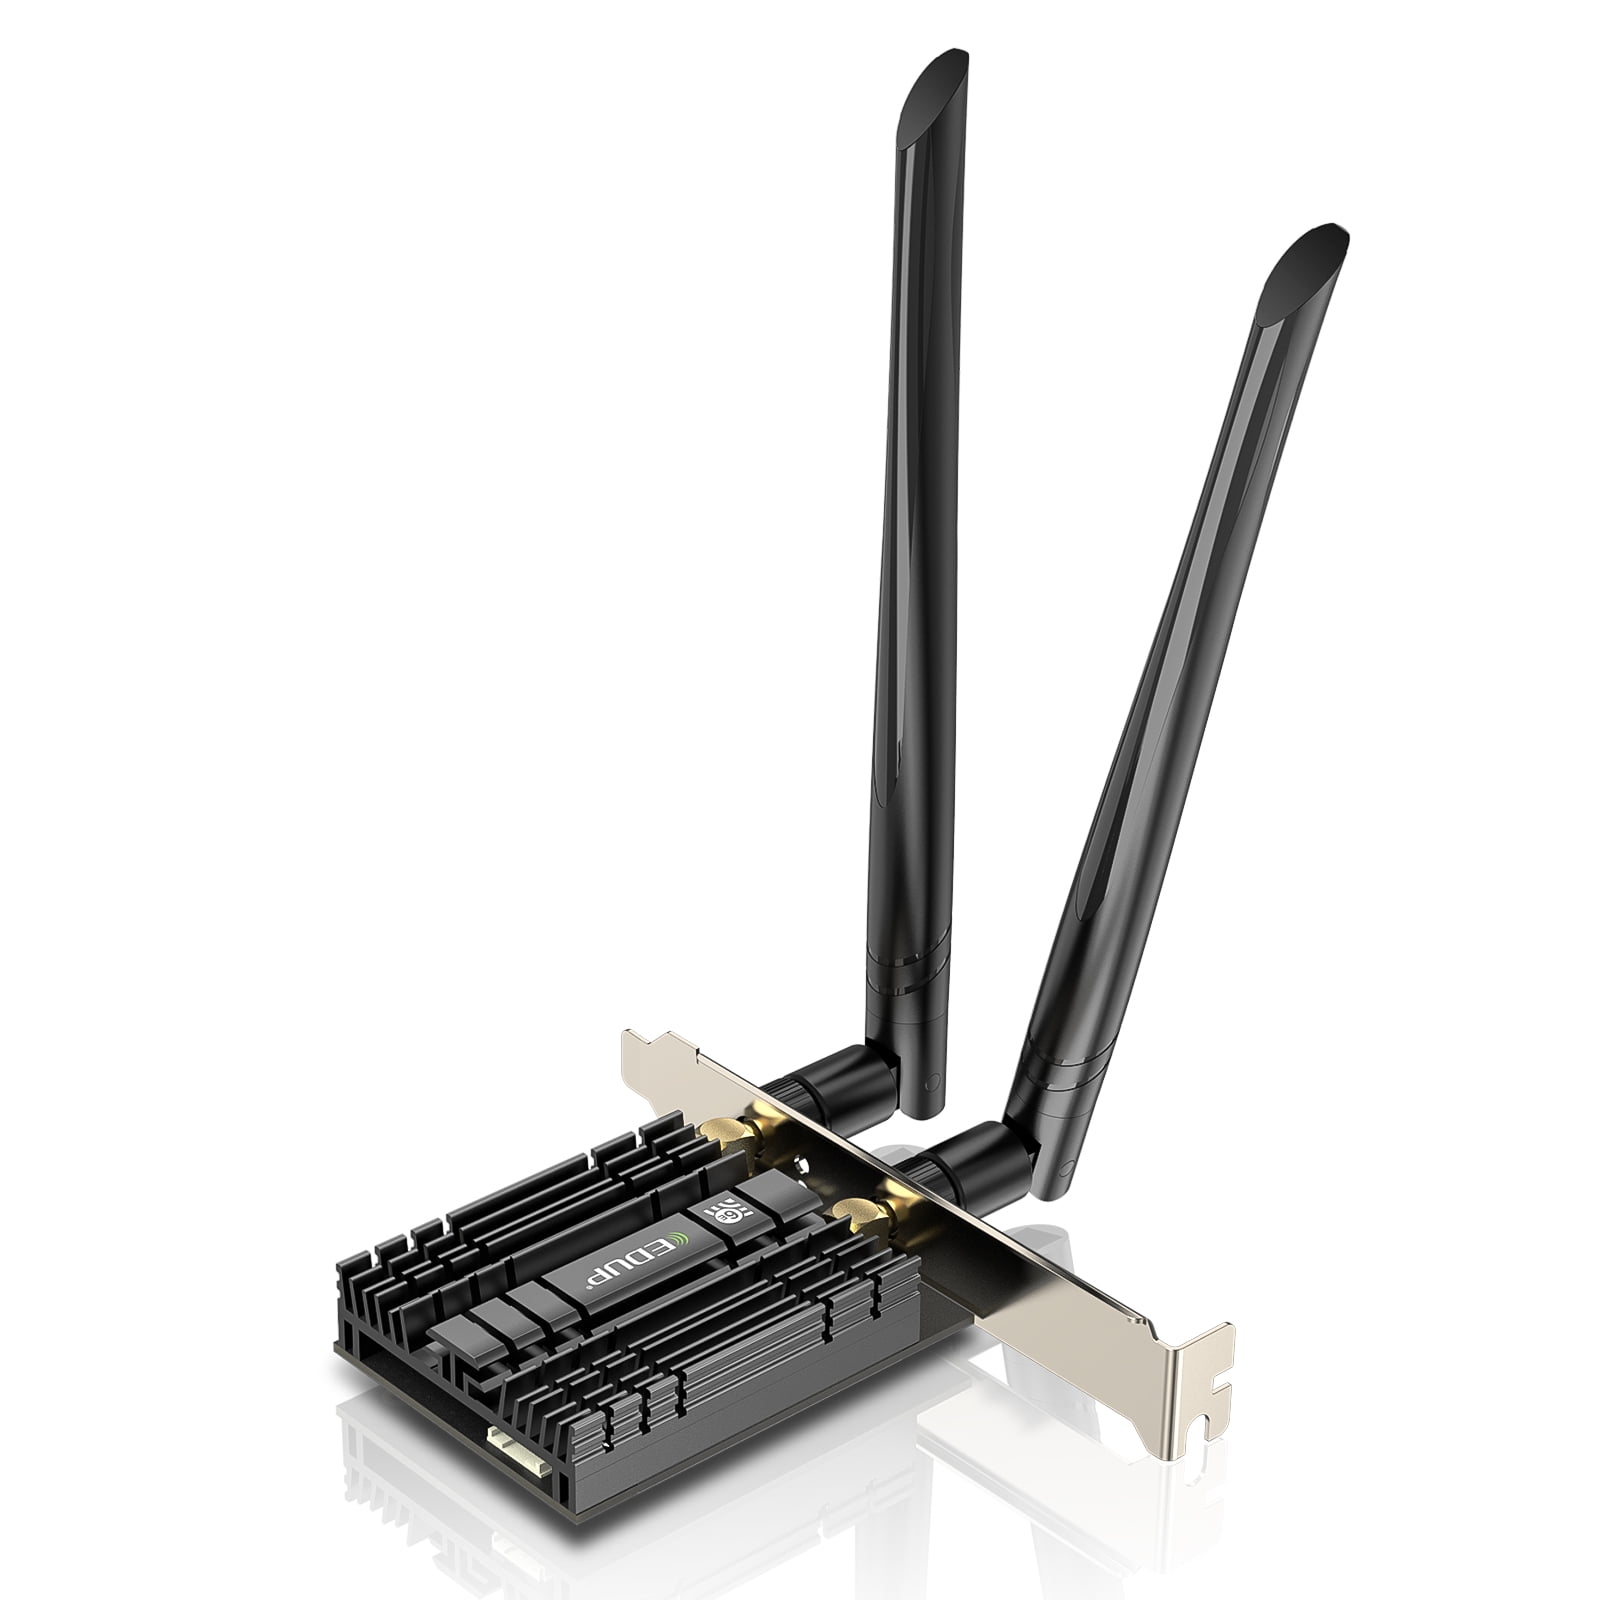 Up to 5400Mbps,160MHz,Ultra-Low Latency,OFDMA,MU-MIMO,Support Windows 11/10 64Bit EDUP WiFi 6E AX210 PCIE WiFi Card Bluetooth5.2 Upgrade to 6GHz/5GHz/2.4GHz Tri-band